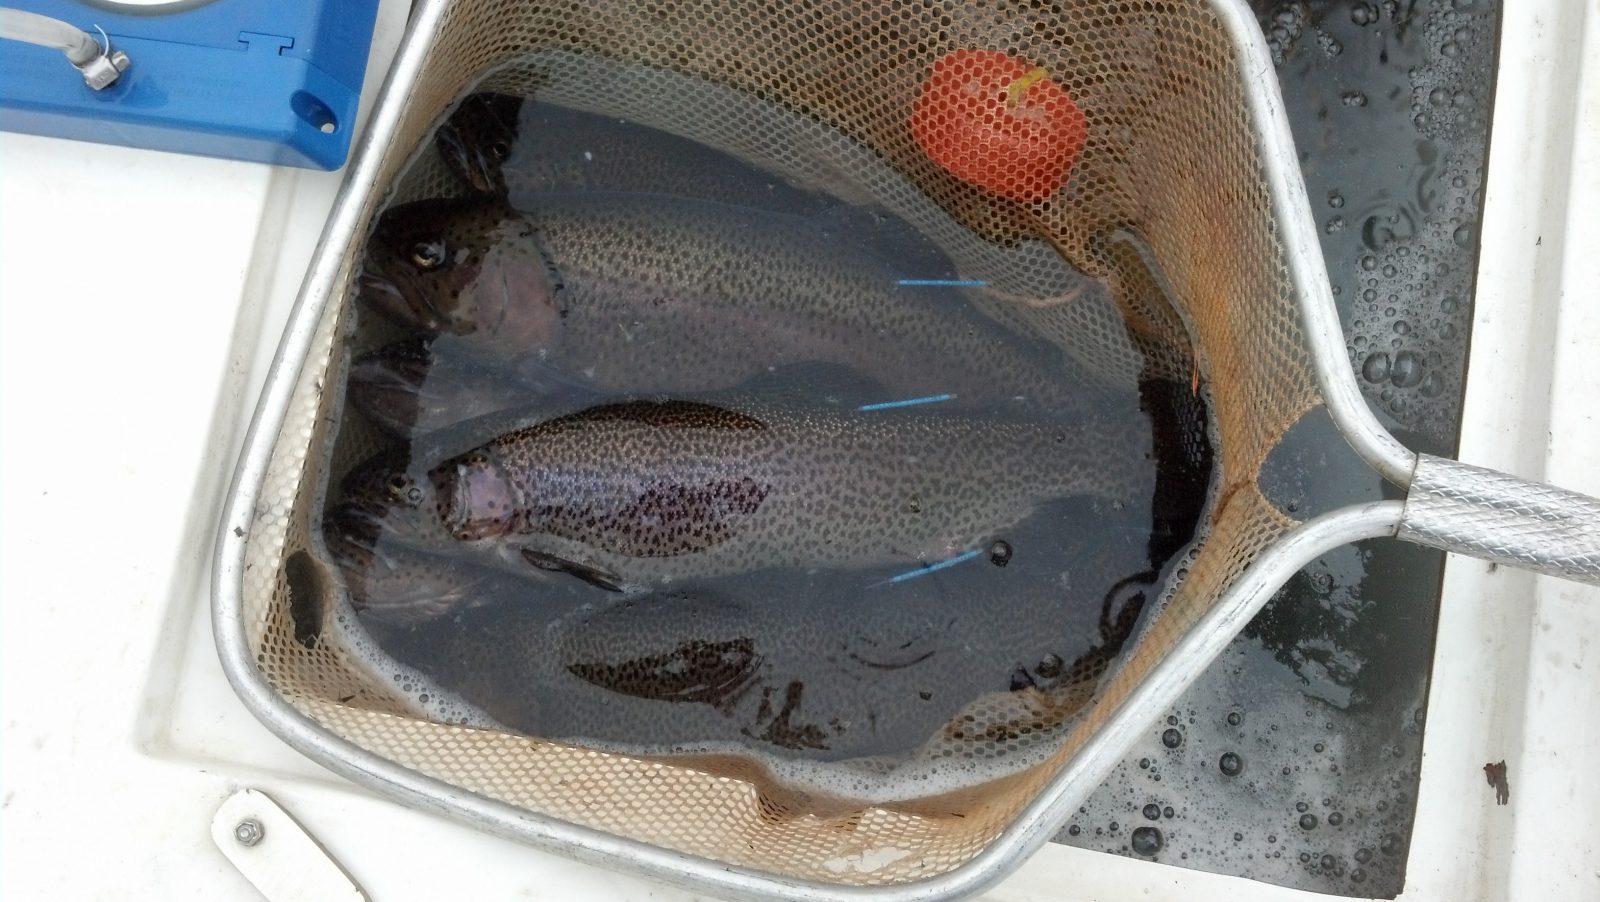 Stock Fish Ponds With Rainbow Trout Now for Winter Fun & Forage